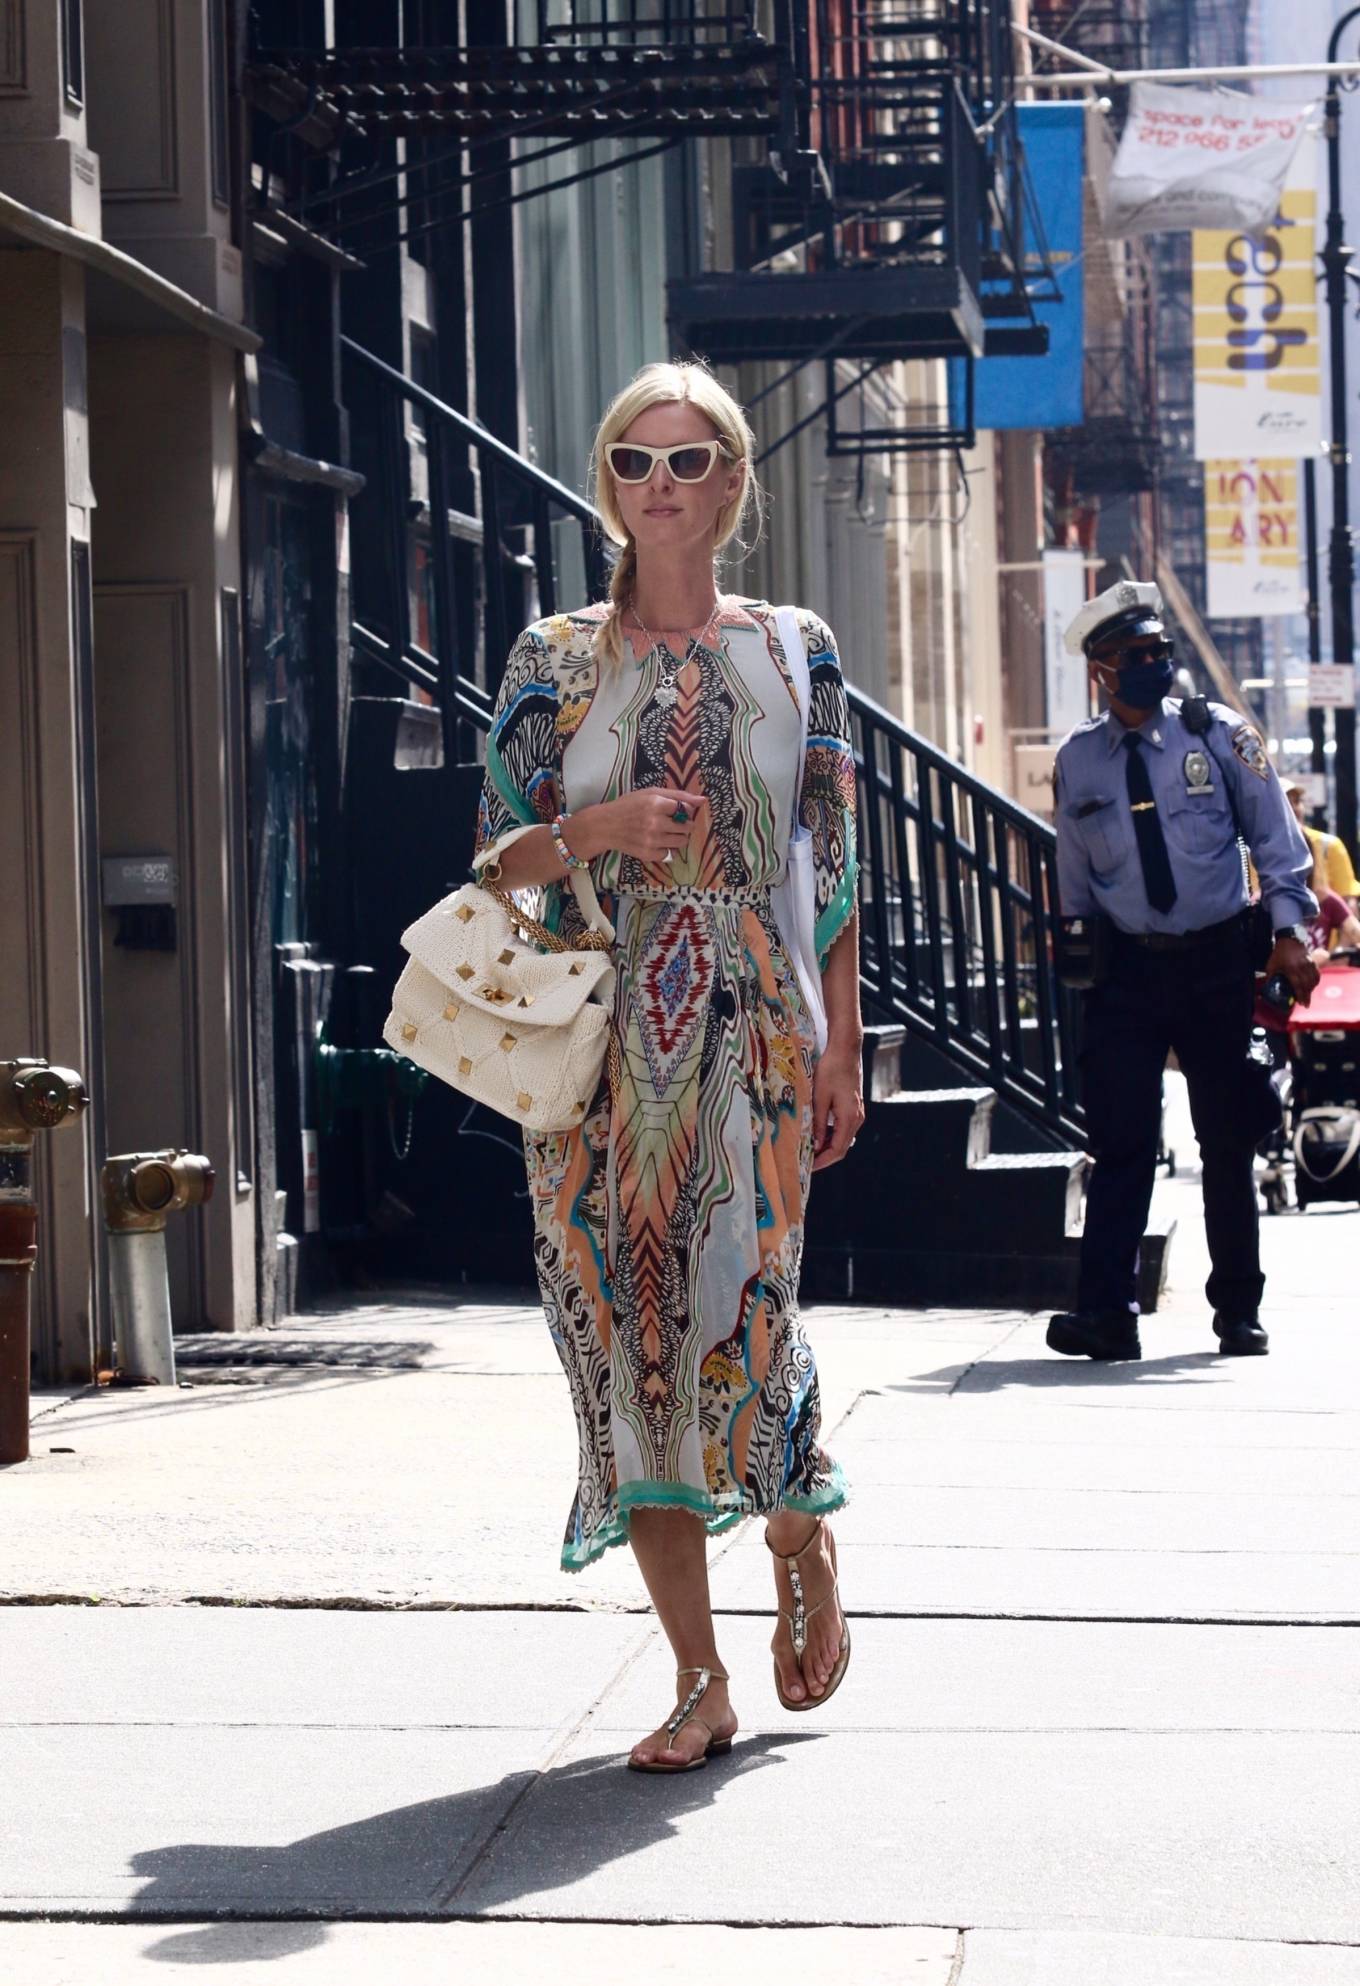 Nicky Hilton 2021 : Nicky Hilton – In a colorful summery dress out on Labor Day Weekend in Manhattan’s Soho area-04